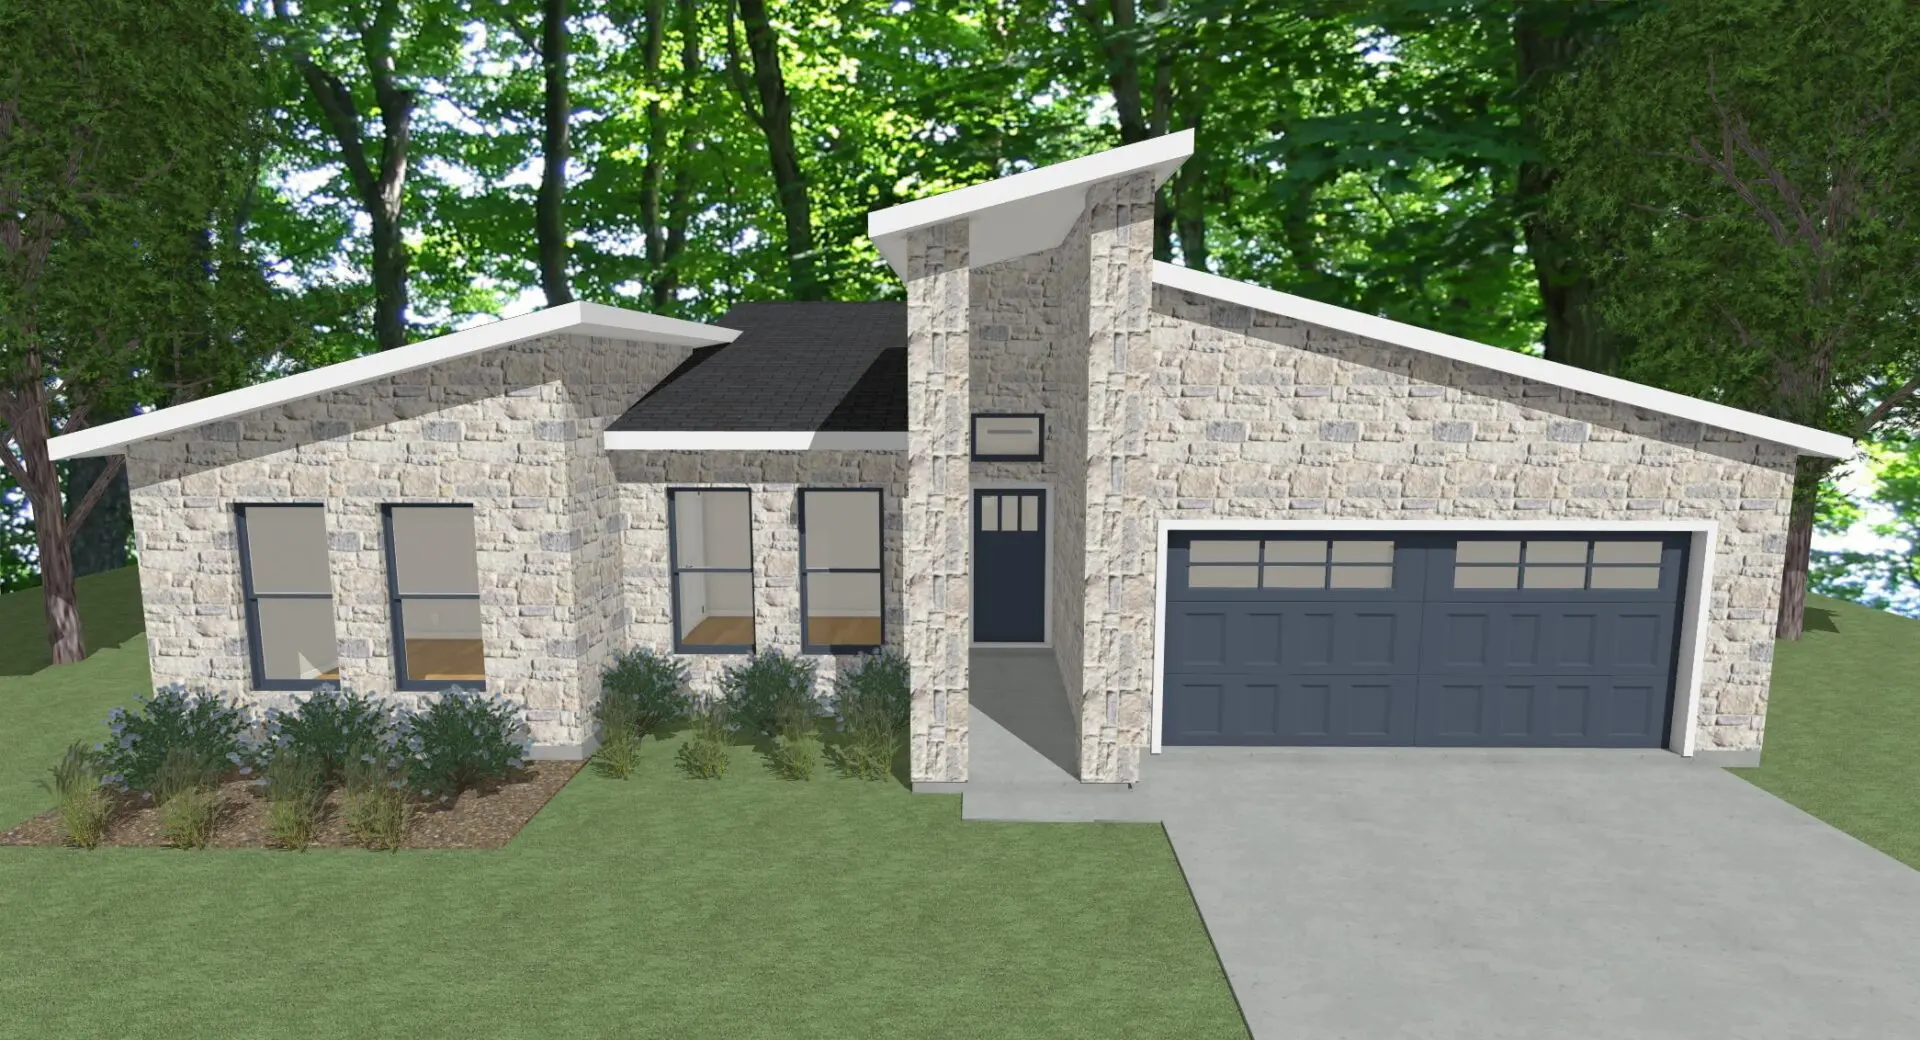 A 3d rendering of a home with a garage.